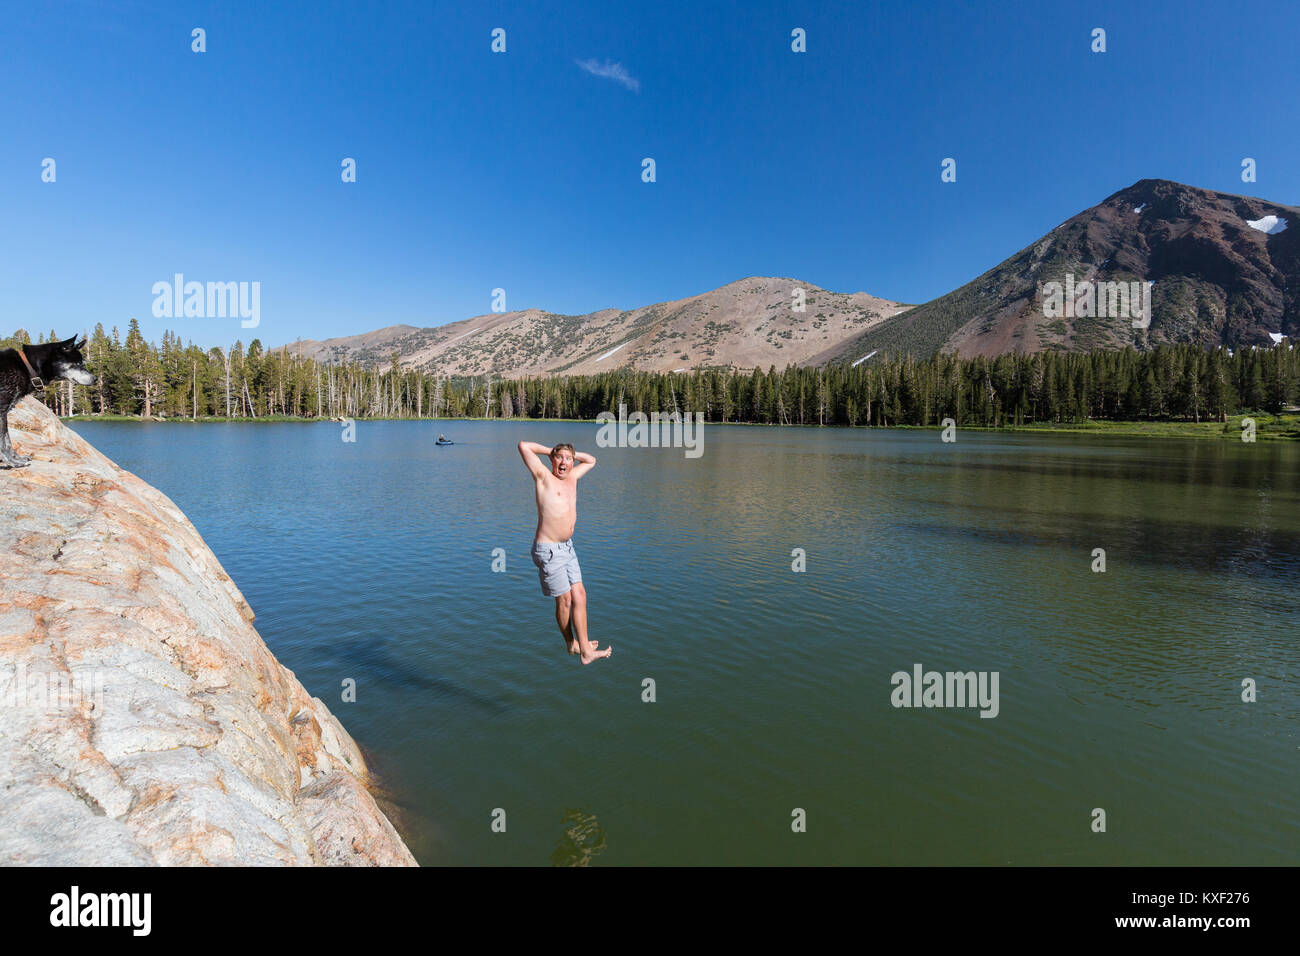 A man leaps into Trumbull Lake in California's Sierra Nevada Mountains while his dog looks on. Stock Photo